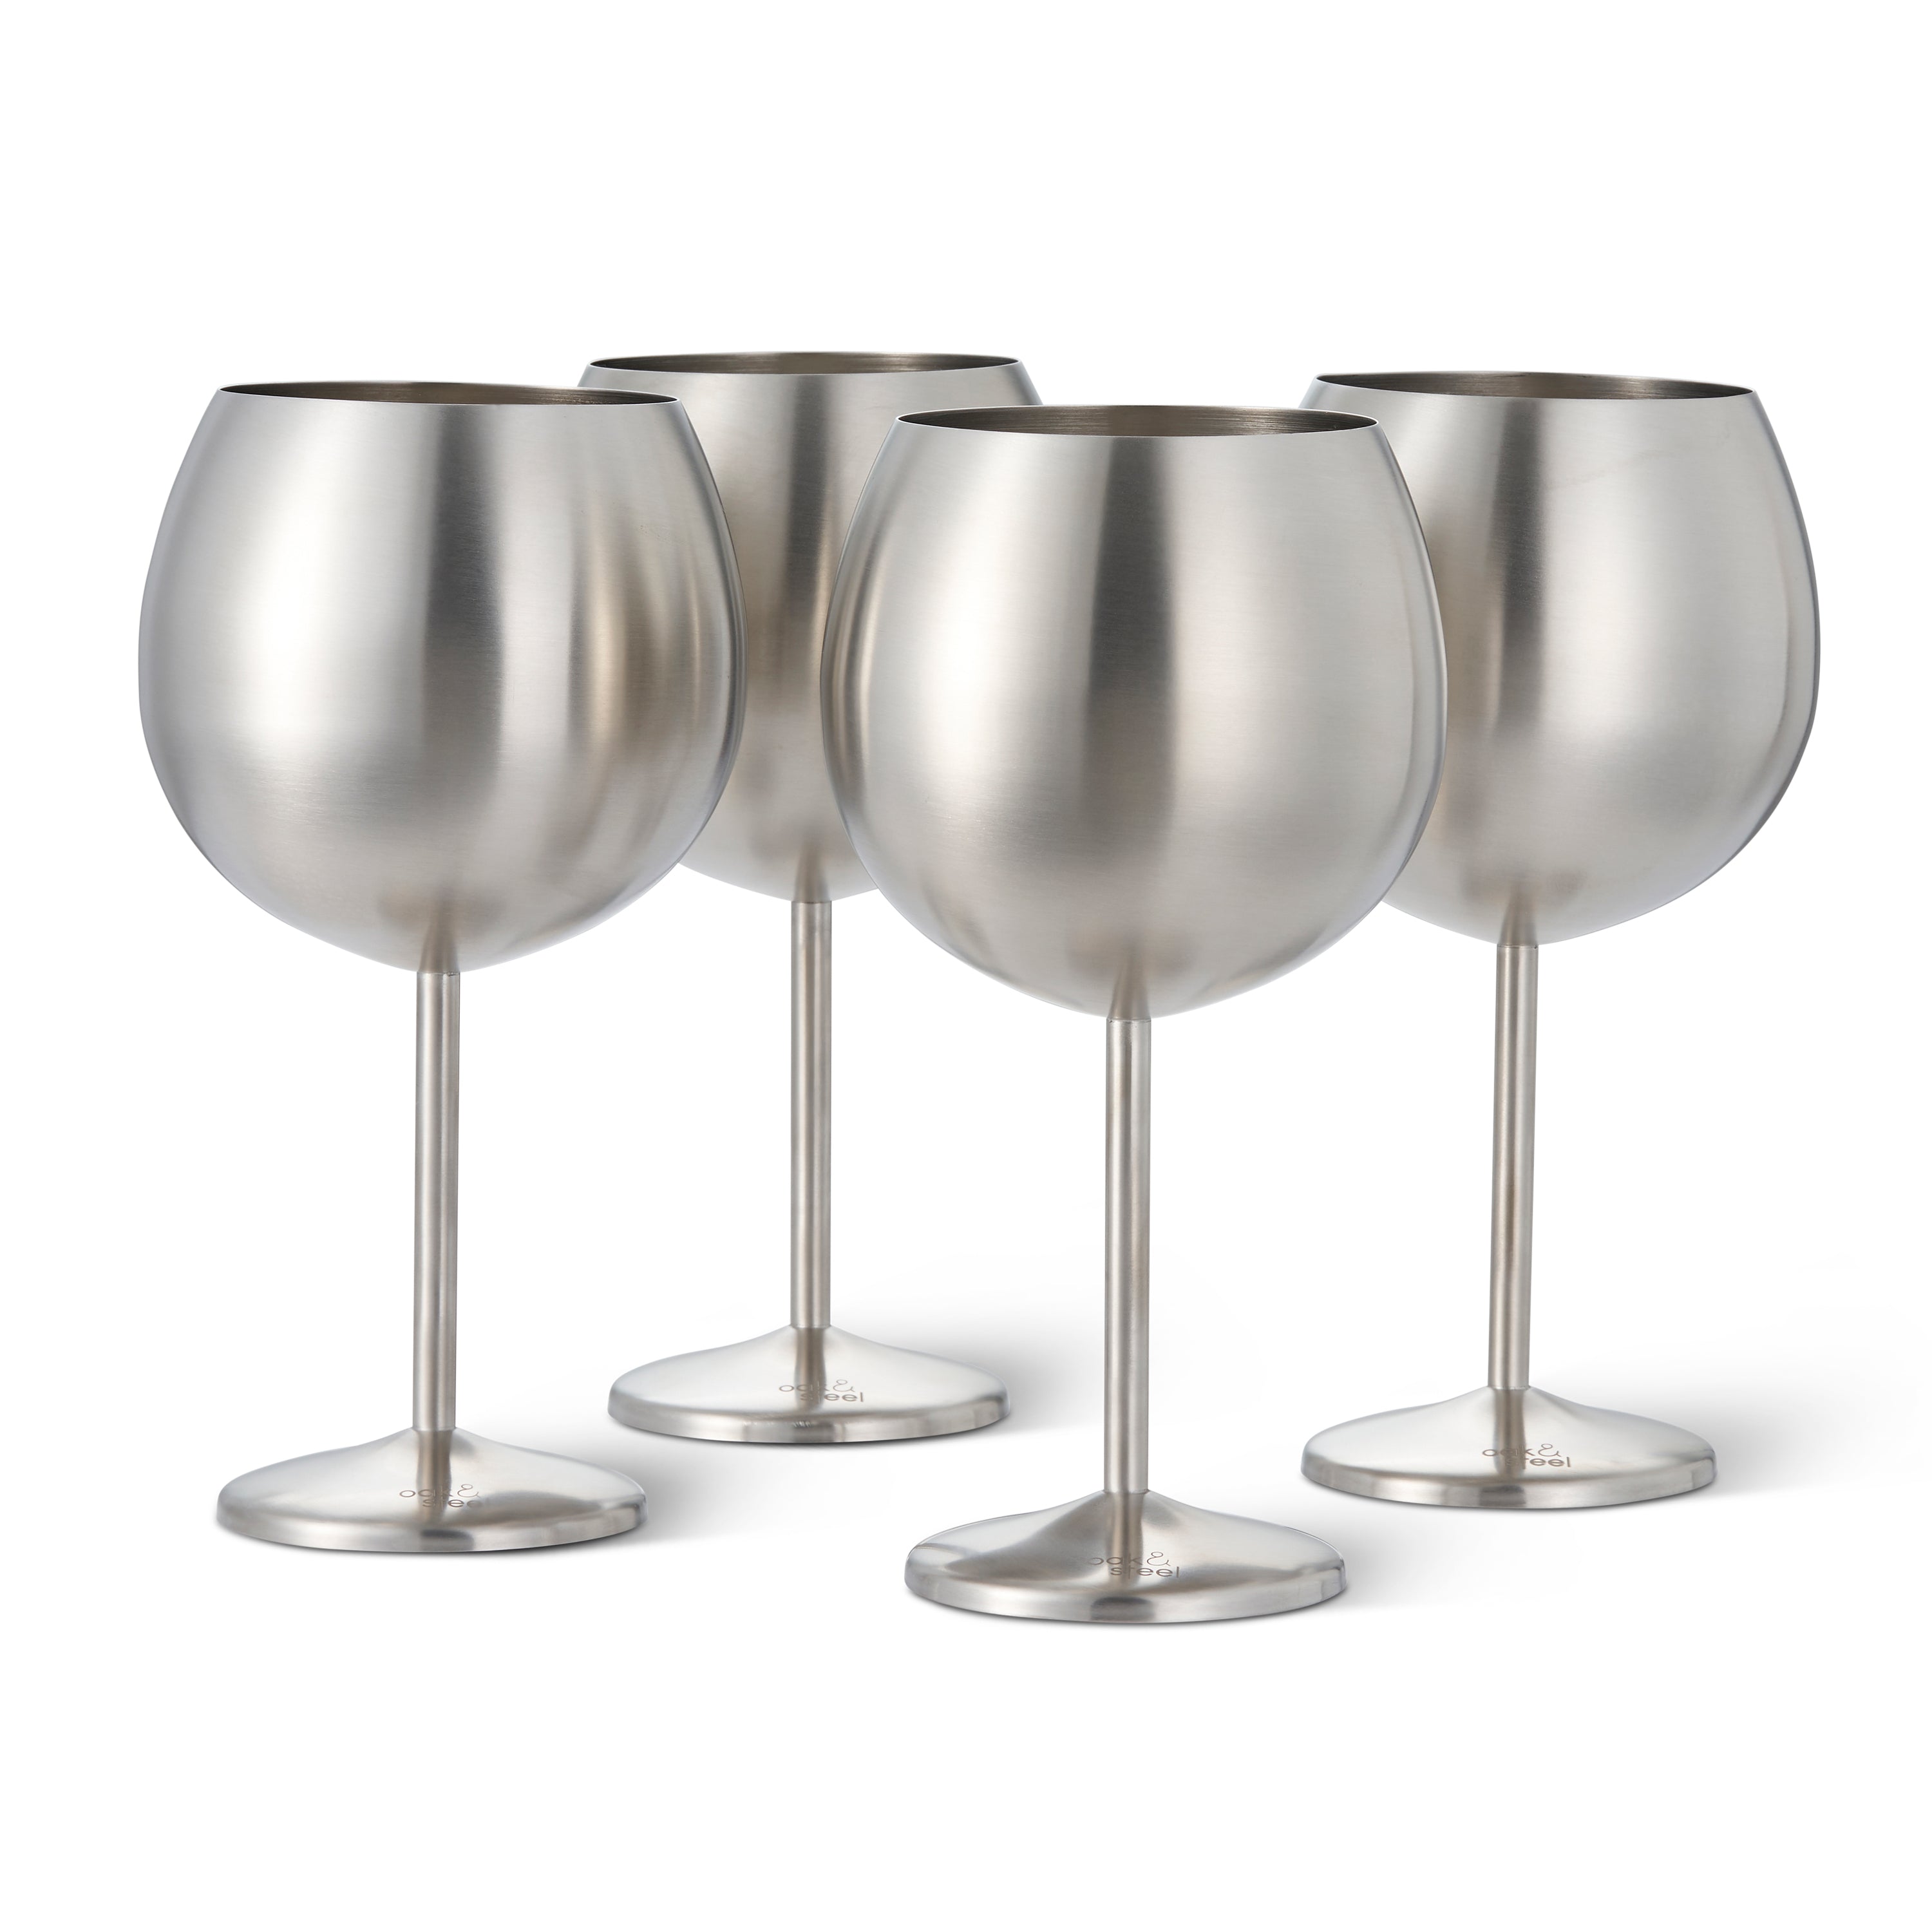 Abcsea 1 Piece Stainless steel Martini Glasses, Stainless steel Cocktail  Glasses, Martini Cocktail G…See more Abcsea 1 Piece Stainless steel Martini